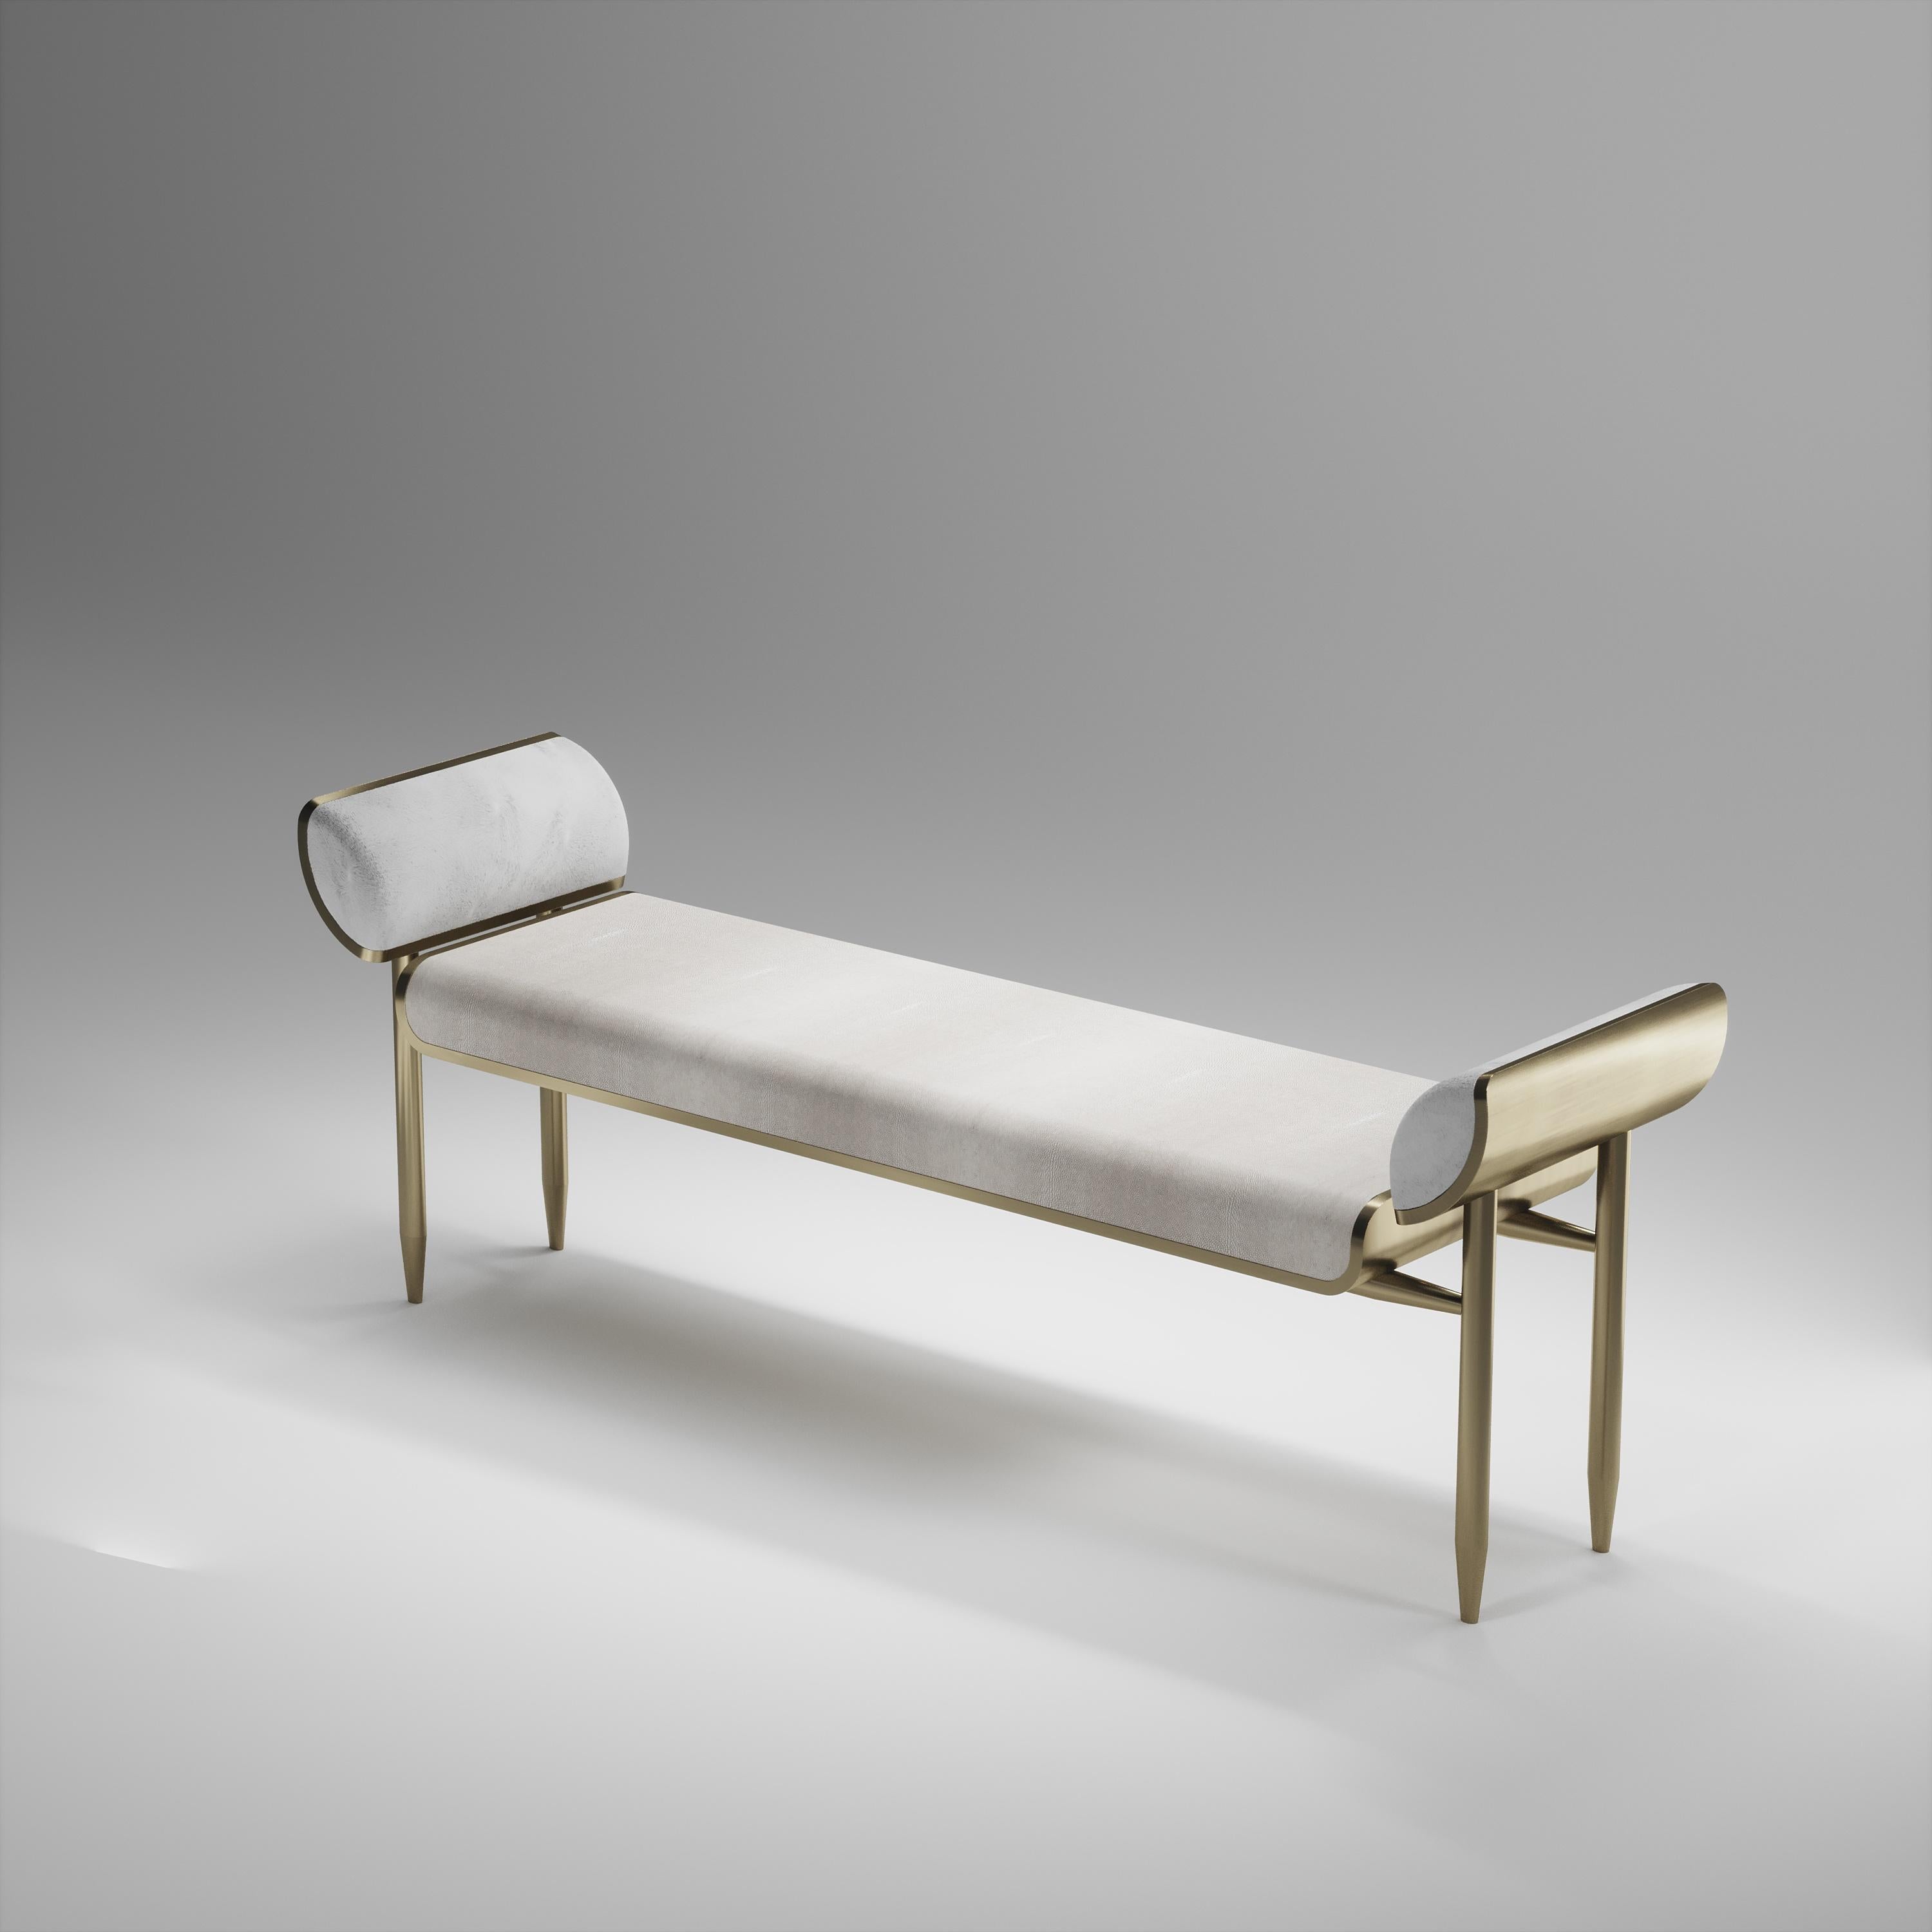 Inspired by the original Dandy bench by KIFU PARIS (see images at end of slide), the Dandy II Bench is the ultimate luxury seating. The seating area is inlaid in cream shagreen and the frame, legs and sides of the bench are completely inlaid in